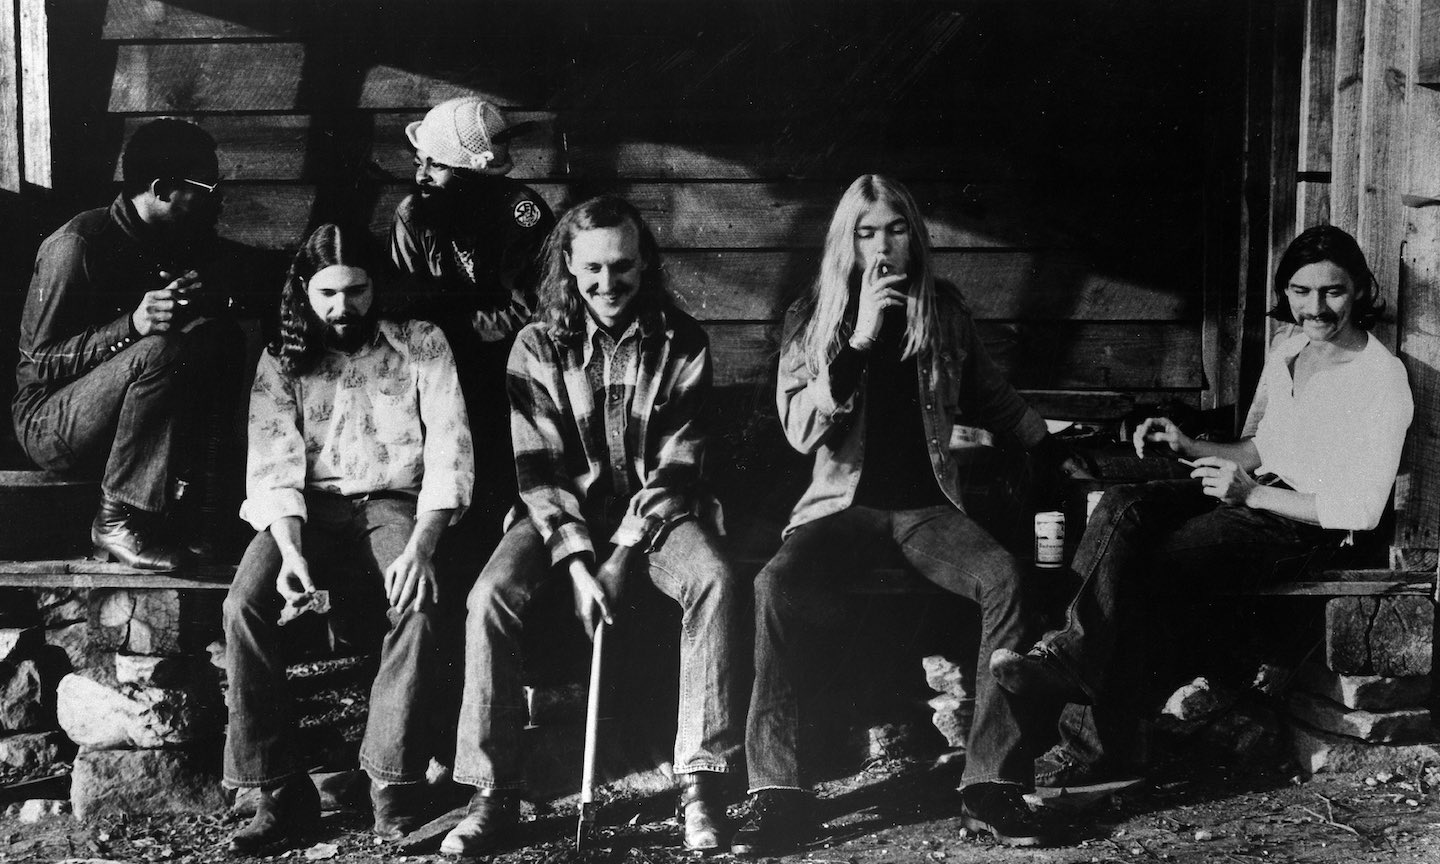 New Book In The Works On Allman Brothers' 'Brothers And Sisters' Era